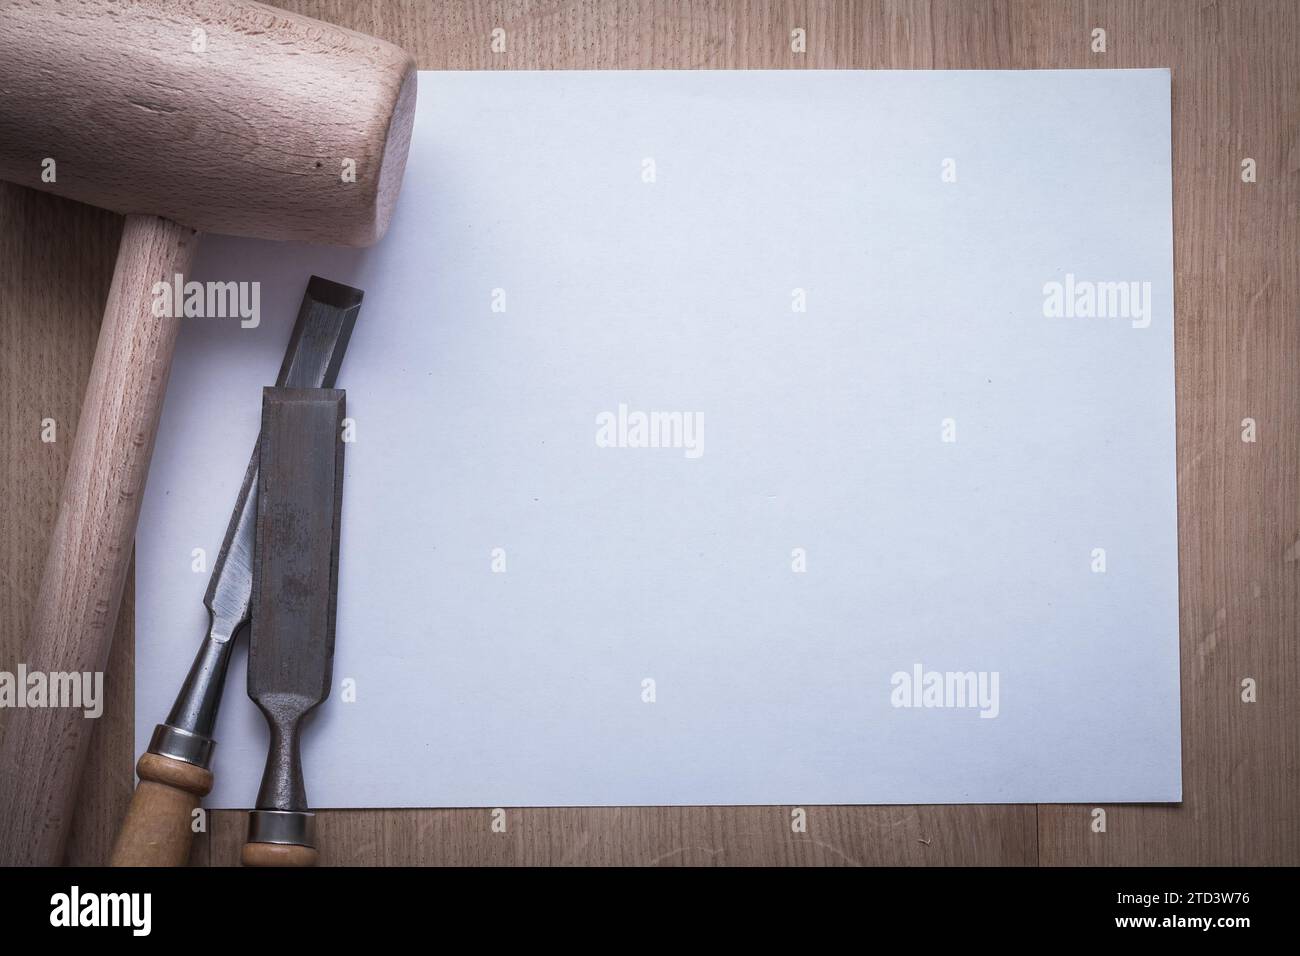 Metal firmer chisel lump hammer and blank sheet of paper on wooden board copy space construction concept Stock Photo